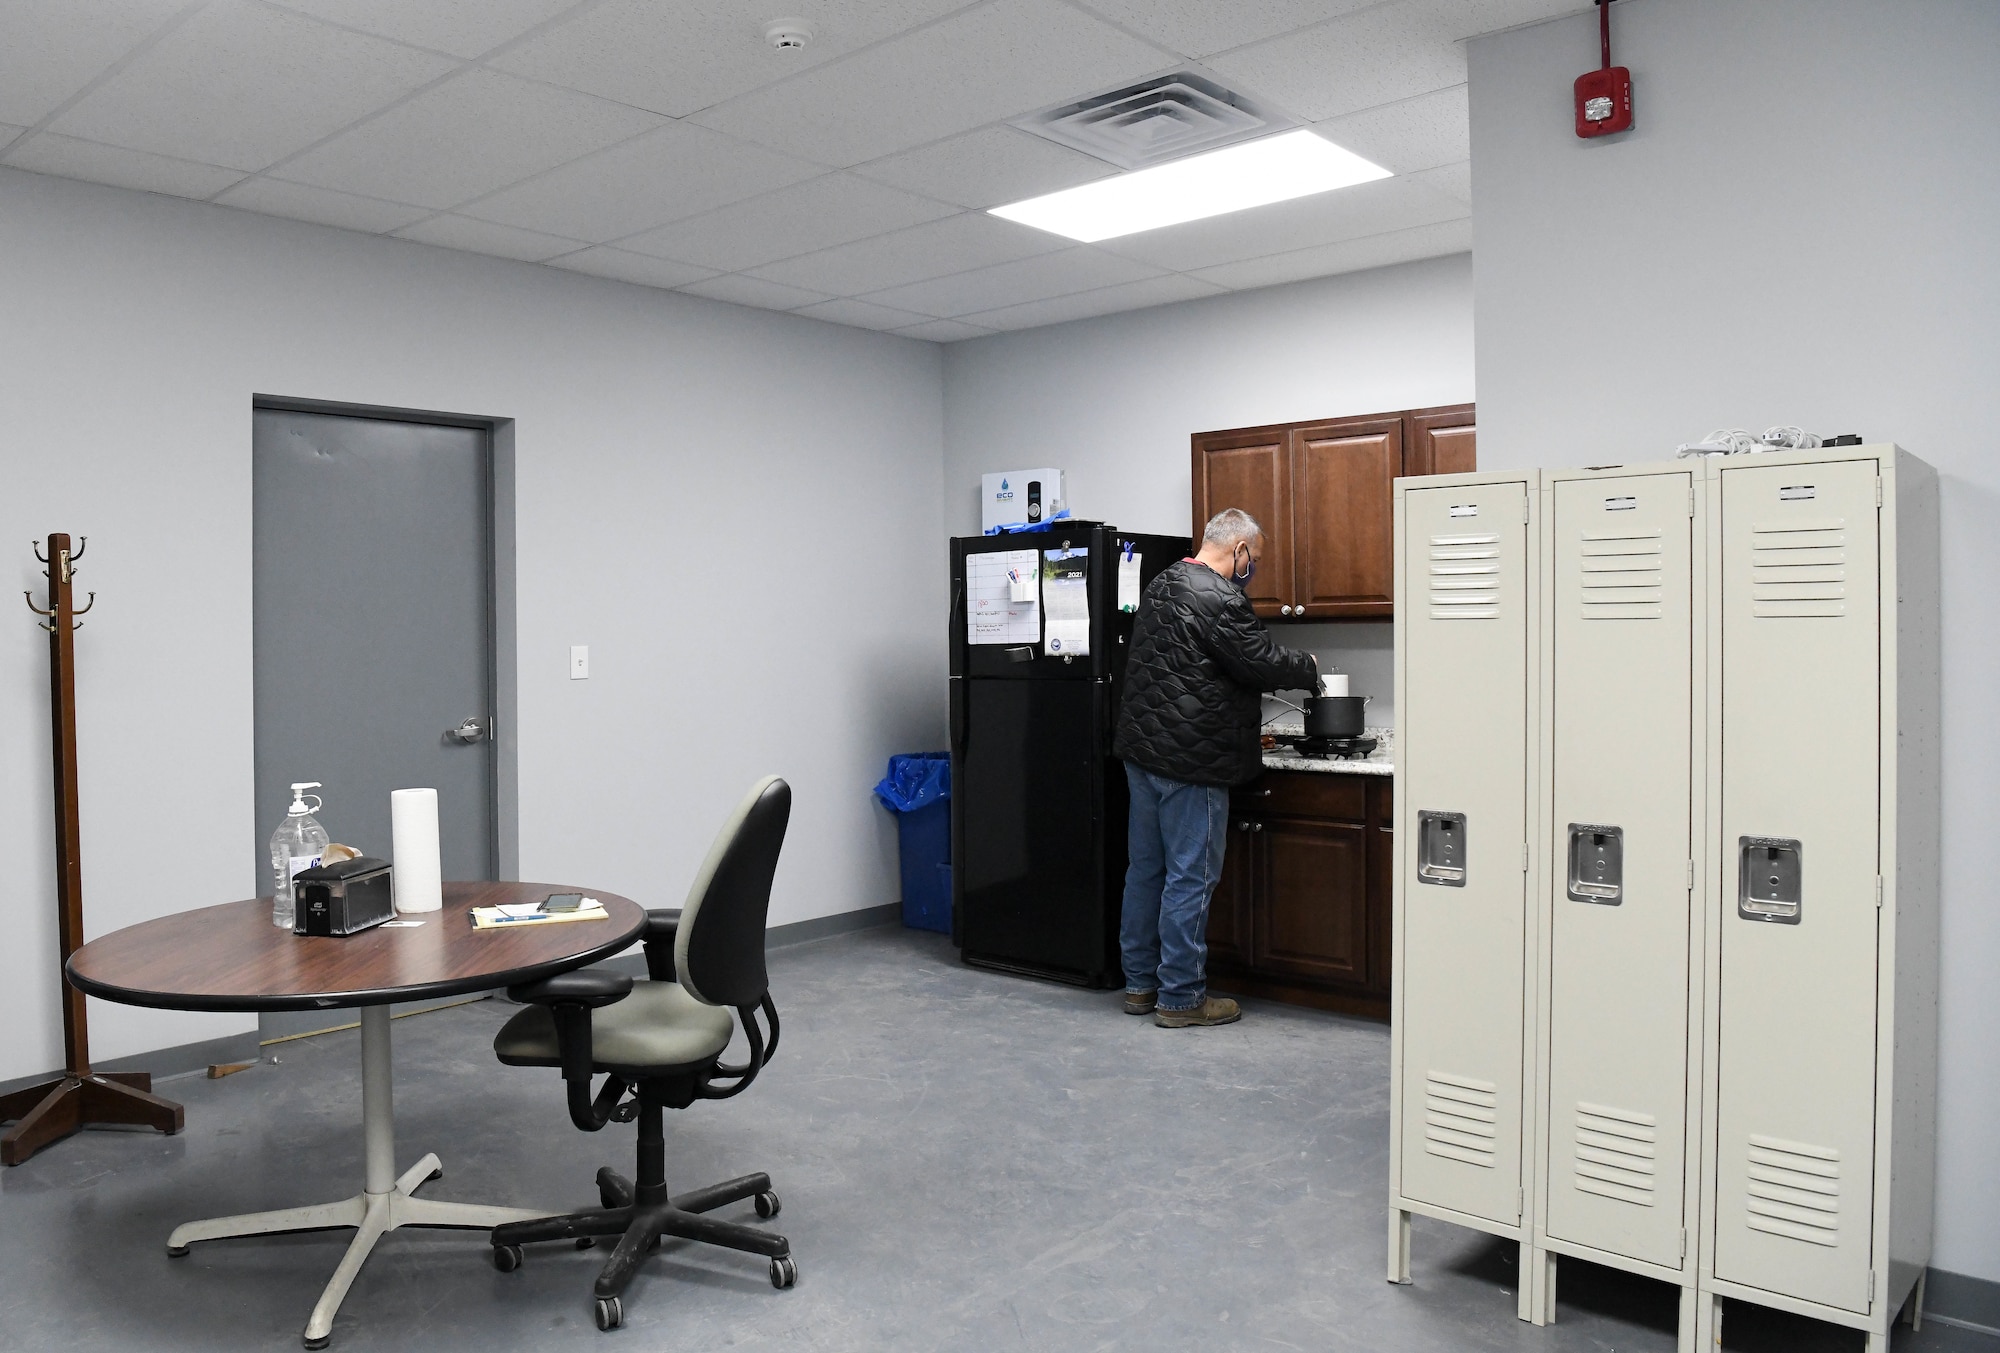 Bud Schell, a motor vehicle operator for the Arnold Air Force Base Services Recycling Program, prepares his lunch in the newly-constructed breakroom at the Recycling Facility at Arnold AFB, Tenn., Feb. 11, 2021. (U.S. Air Force photo by Jill Pickett)